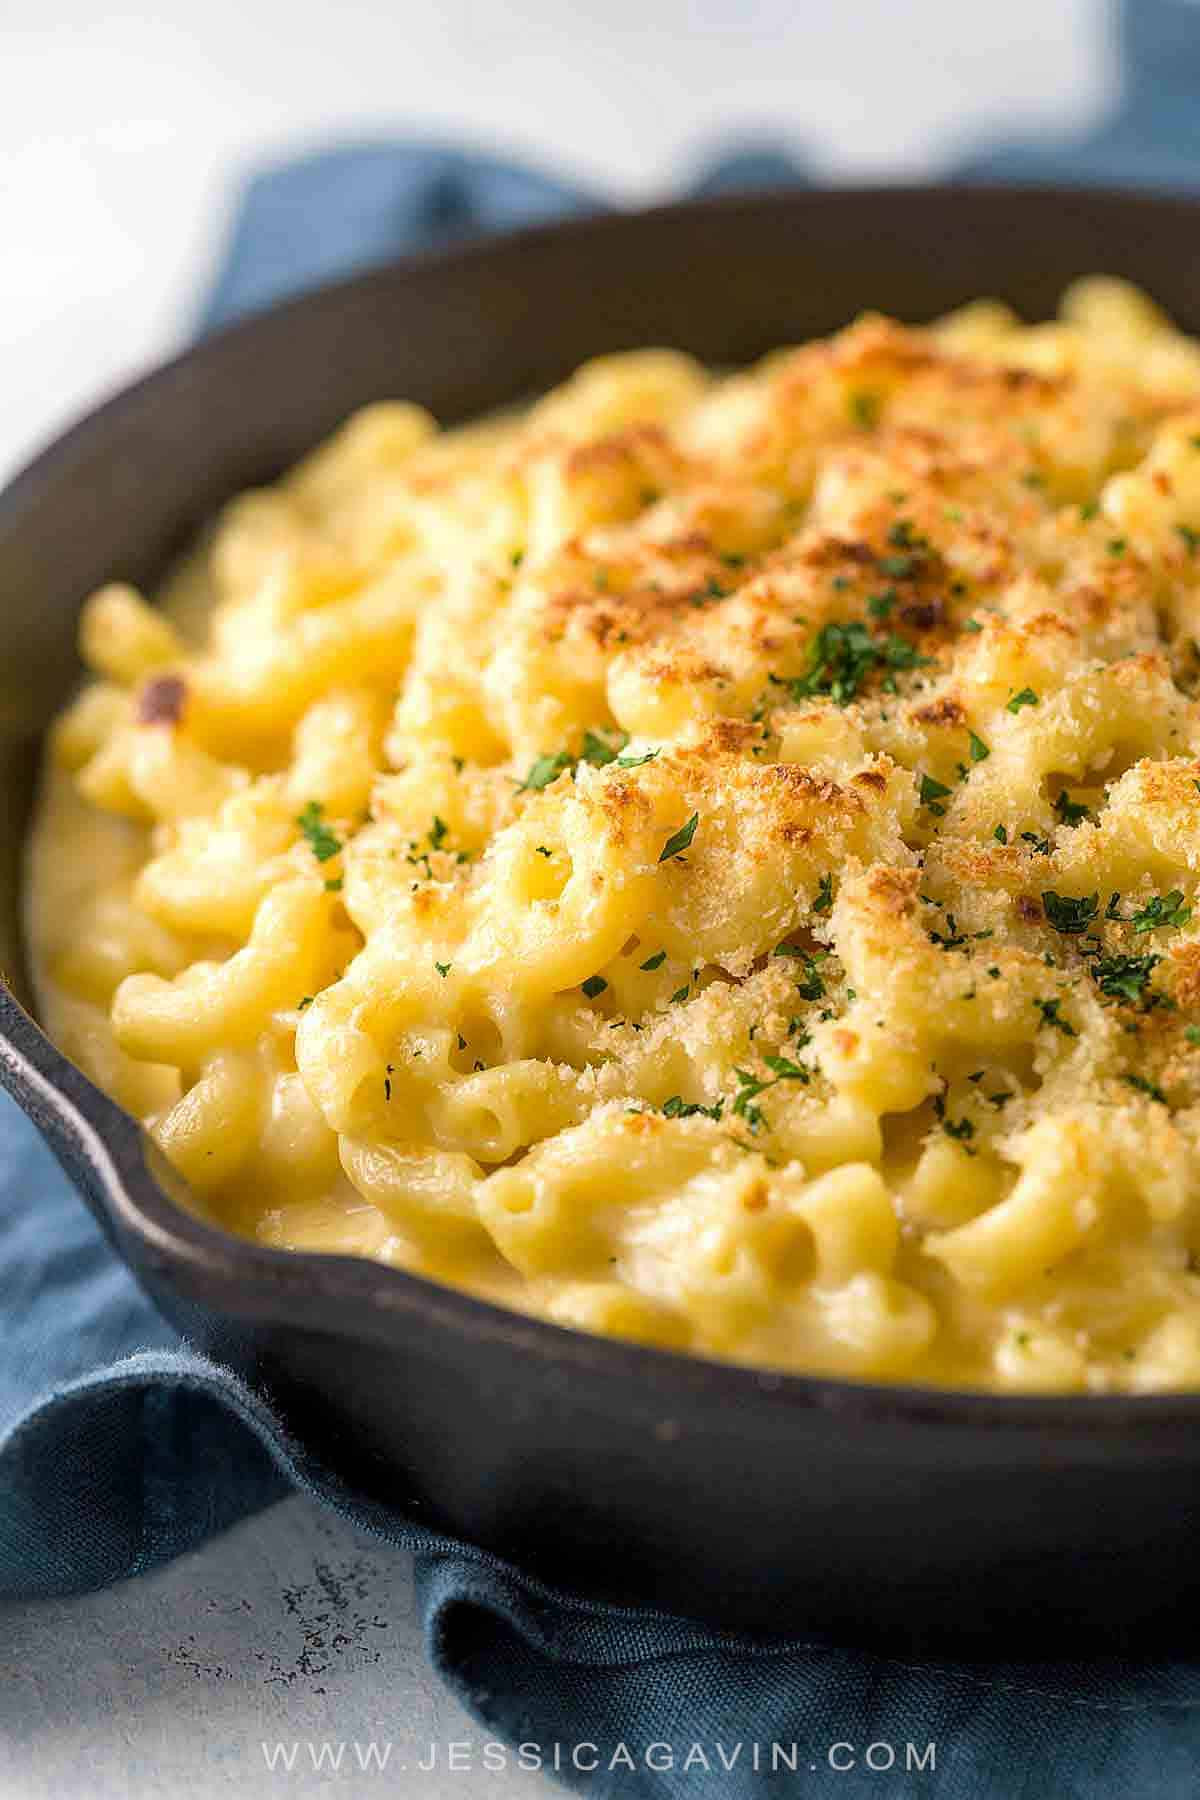 Best Baked Macaroni And Cheese Recipes
 Baked Macaroni and Cheese Jessica Gavin